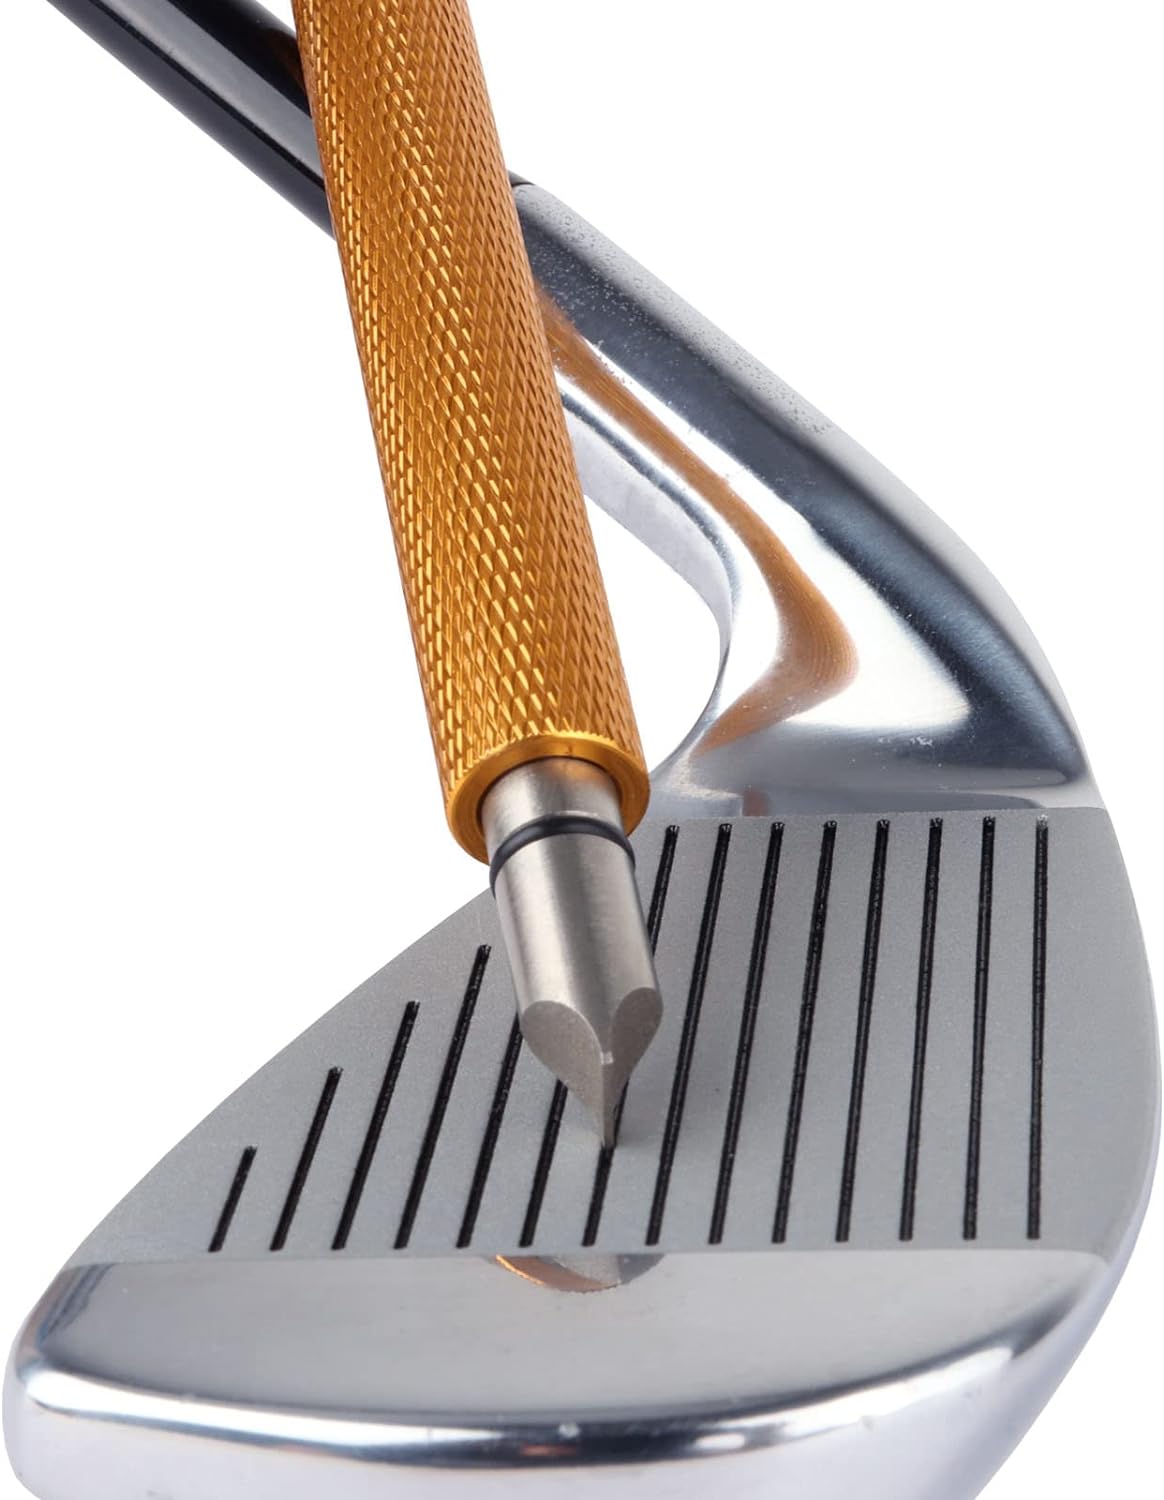 Bulex Golf Club Groove Sharpener, Re-Grooving Tool and Cleaner for Wedges & Irons - Generate Optimal Backspin - Suitable for U & V-Grooves - Gold